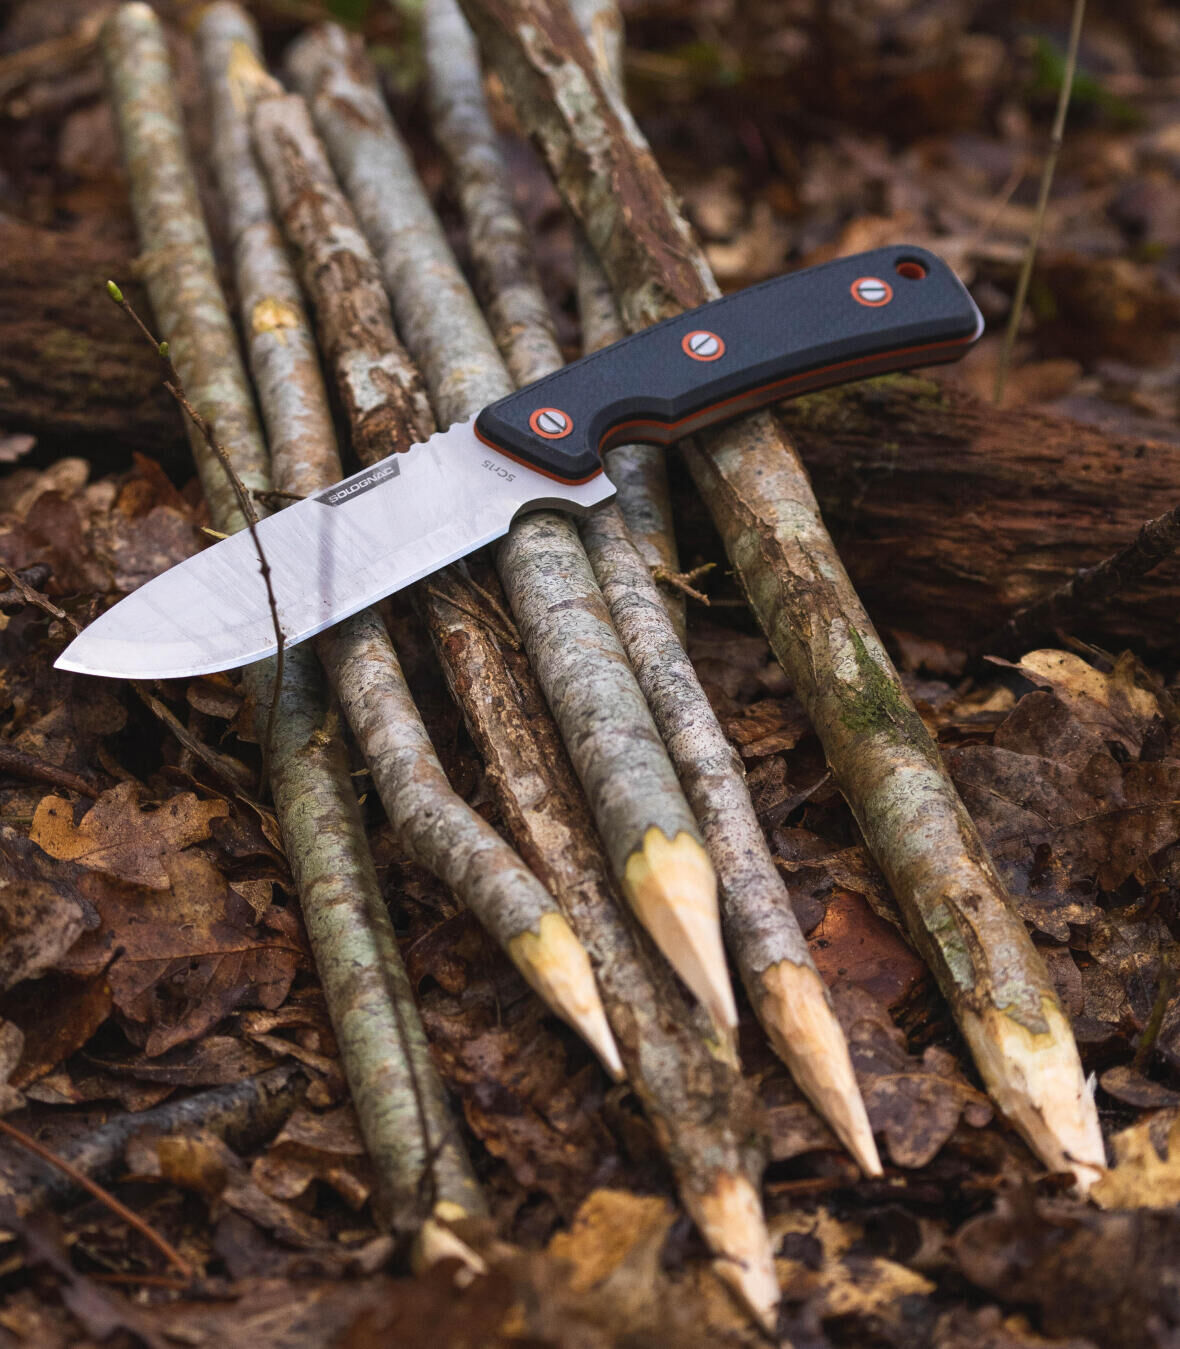 How to choose your hunting or bushcraft knife